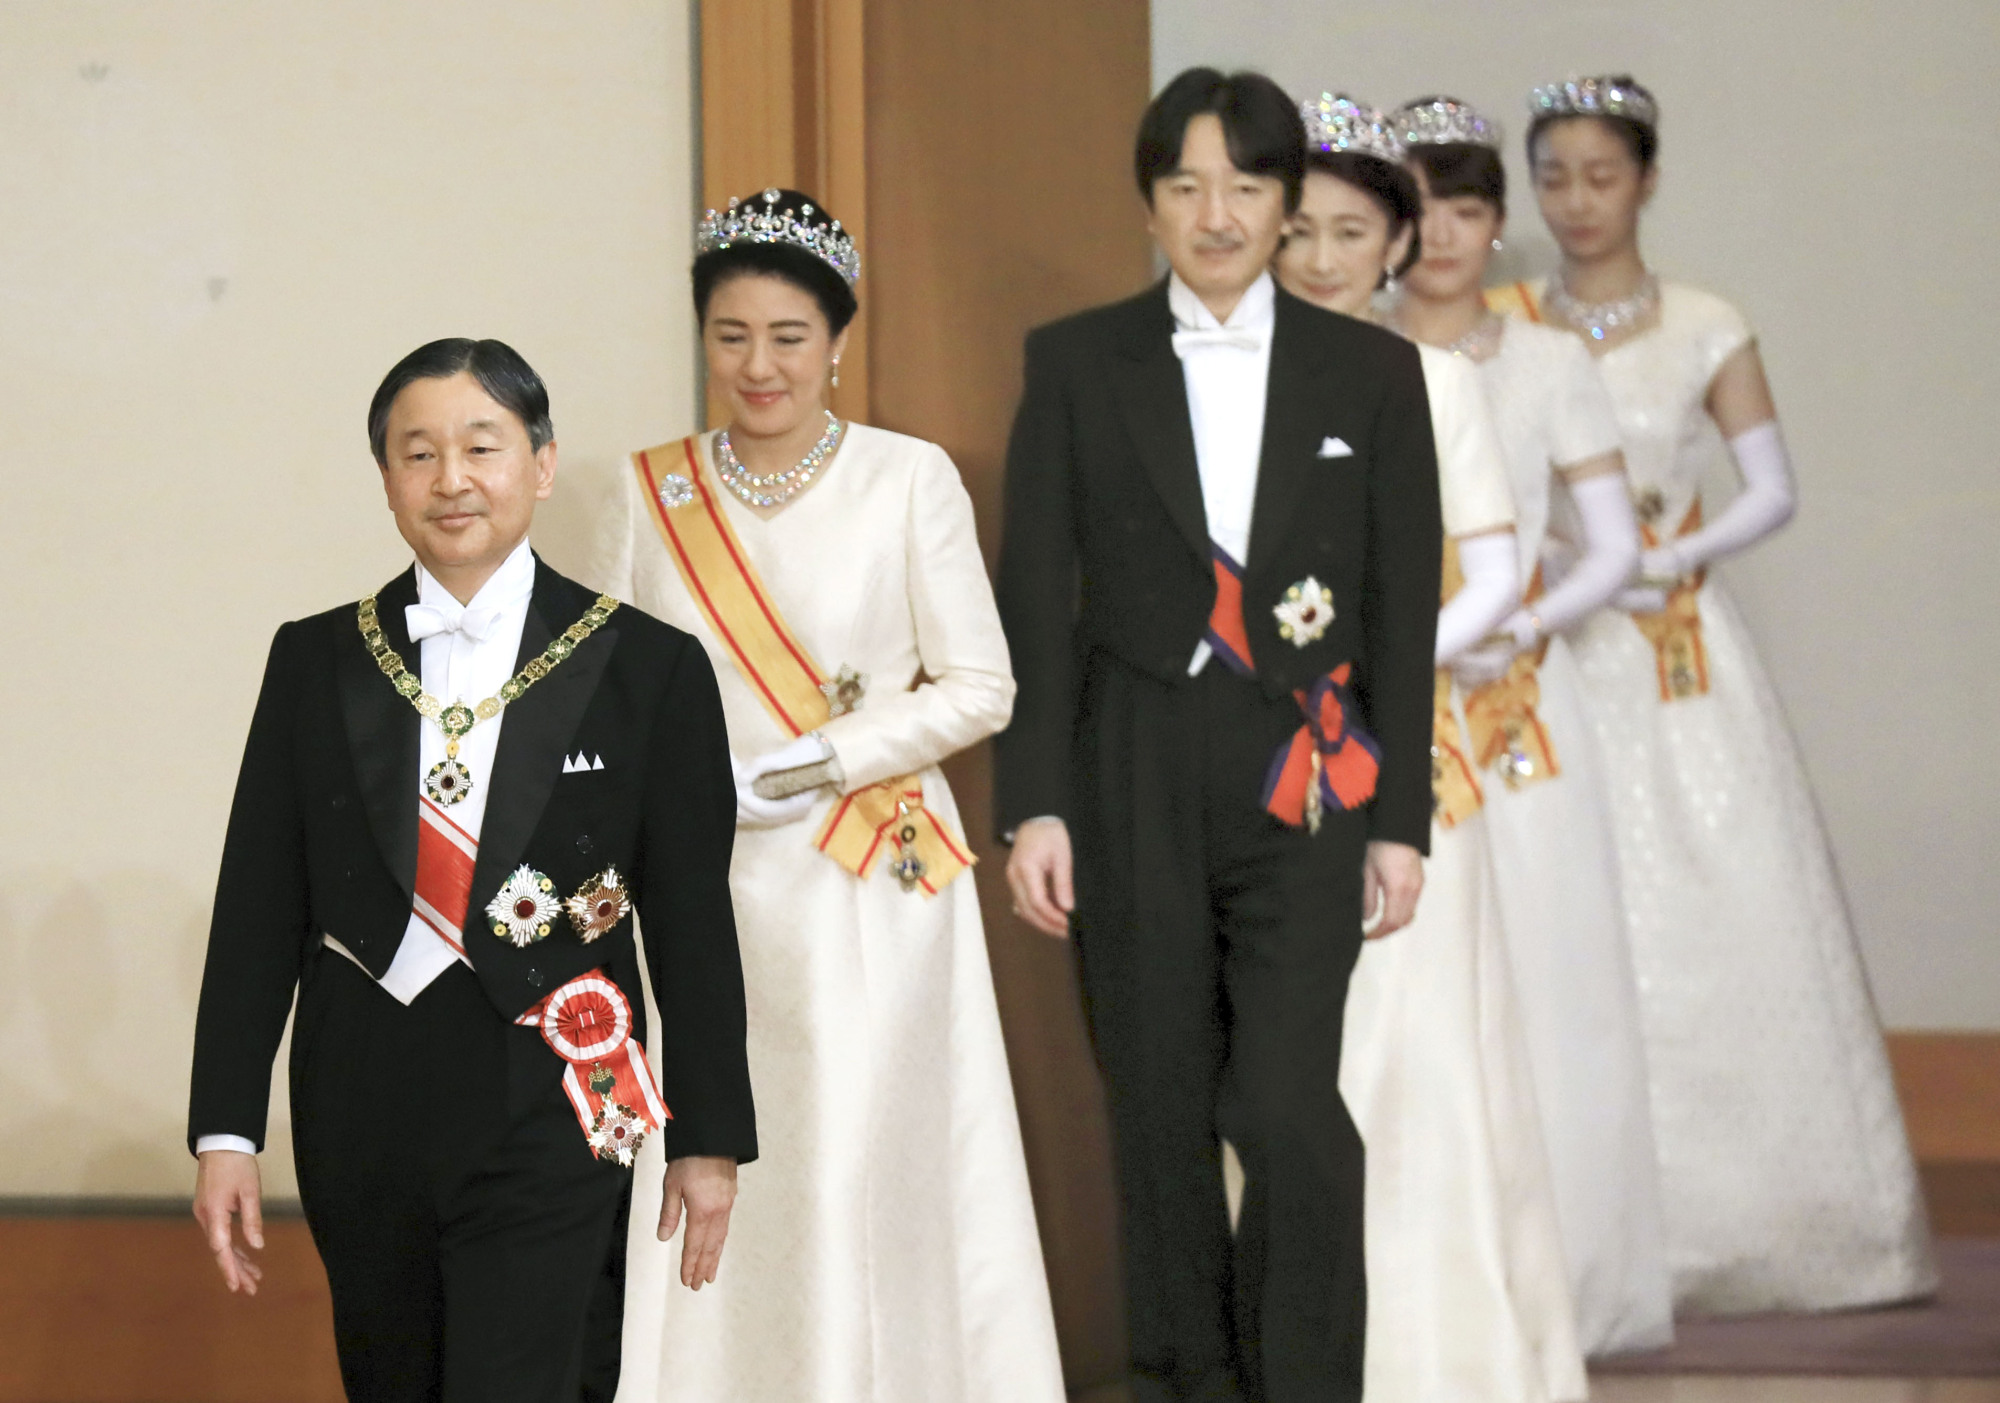 In his New Year greeting, Japan's Emperor prays for COVID victims: